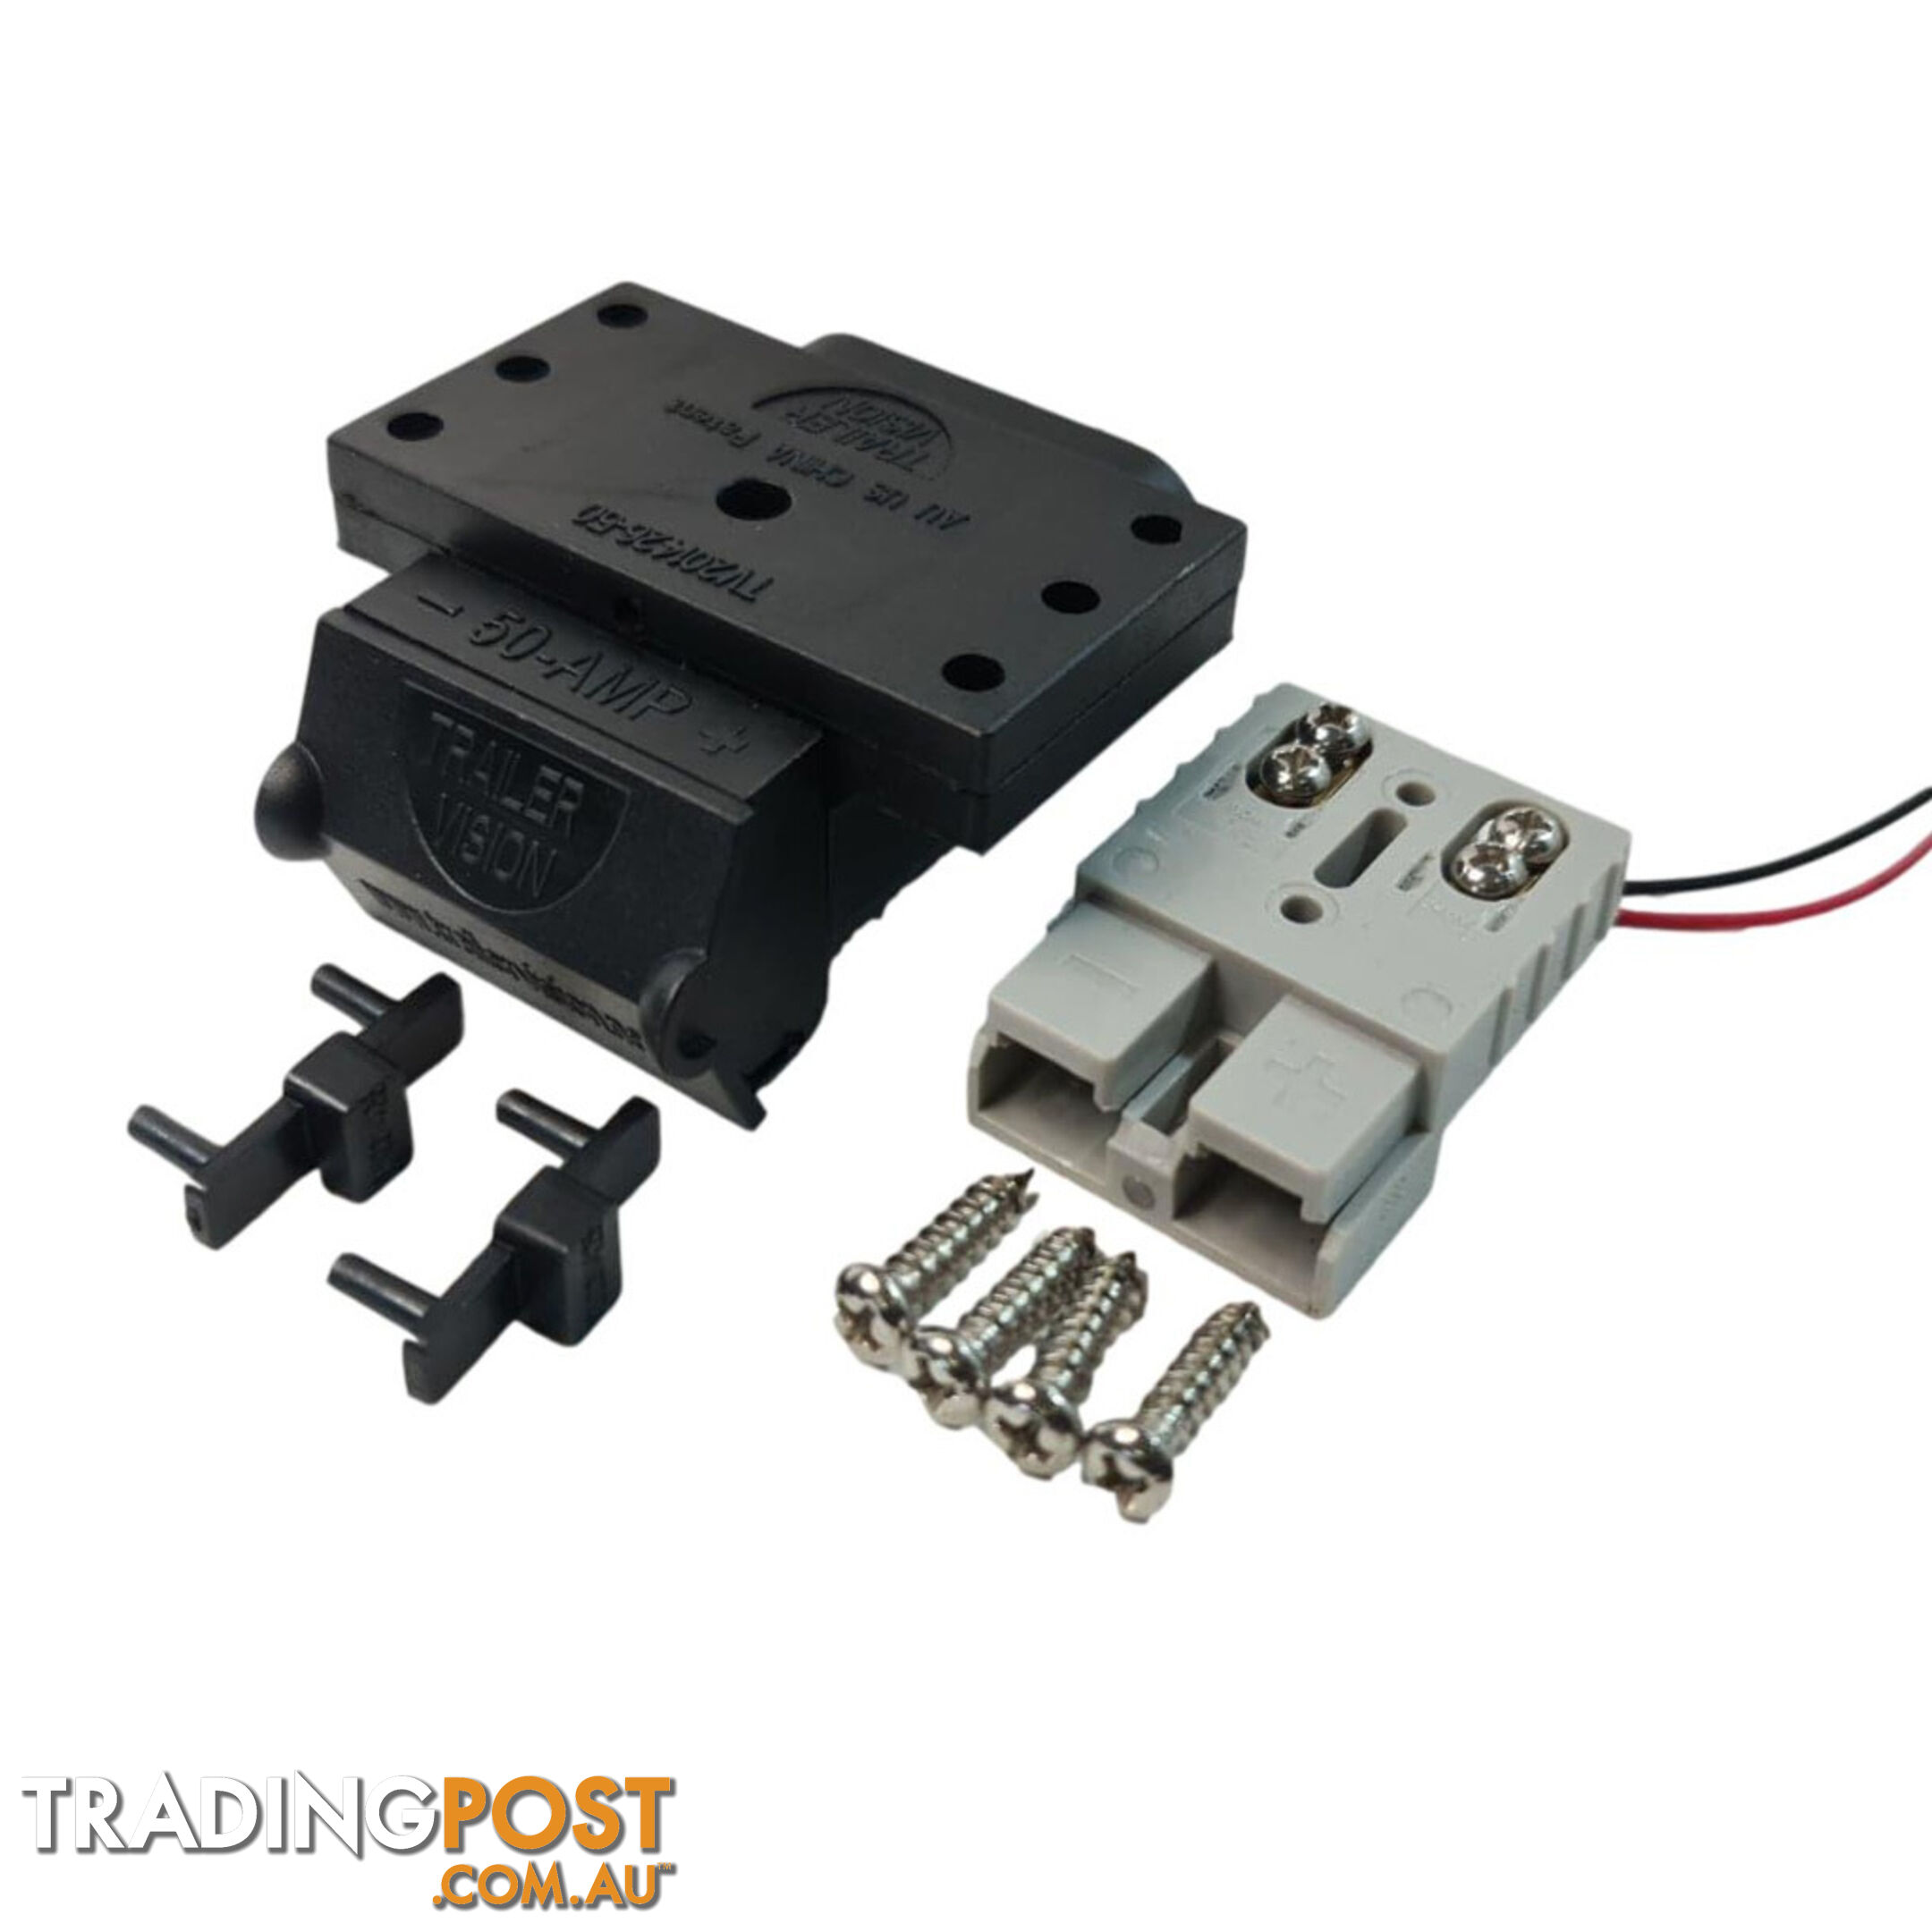 Trailer Vision 50 amp Anderson Plug Top Mount Connector Assembly with Screw Contact Plug SKU - TV-201426-SC